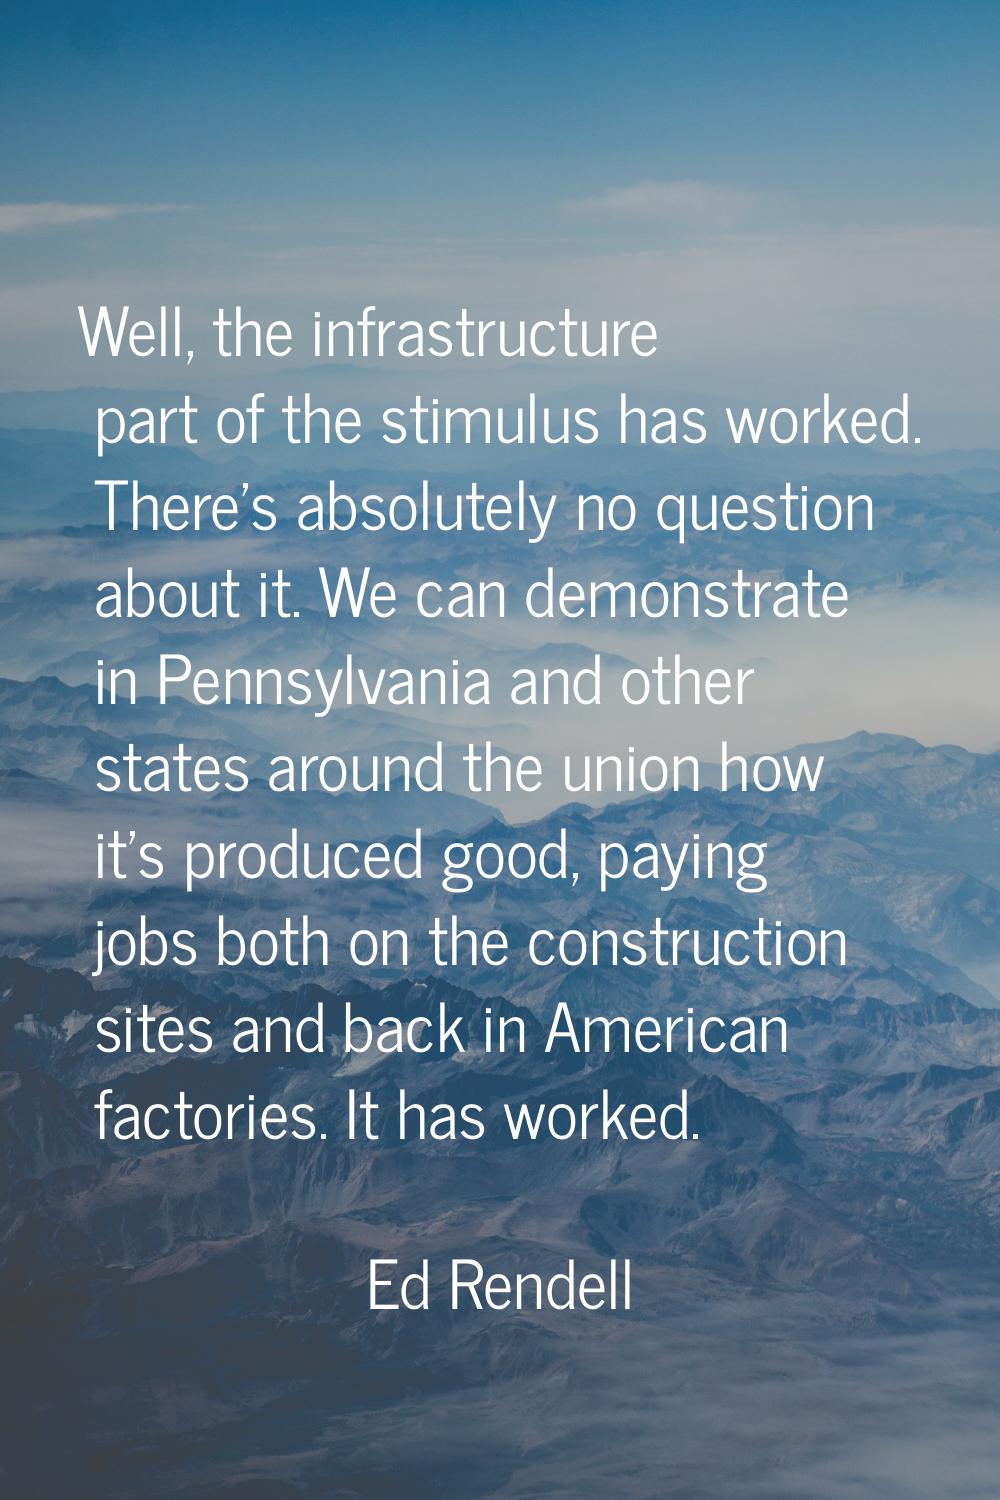 Well, the infrastructure part of the stimulus has worked. There's absolutely no question about it. 